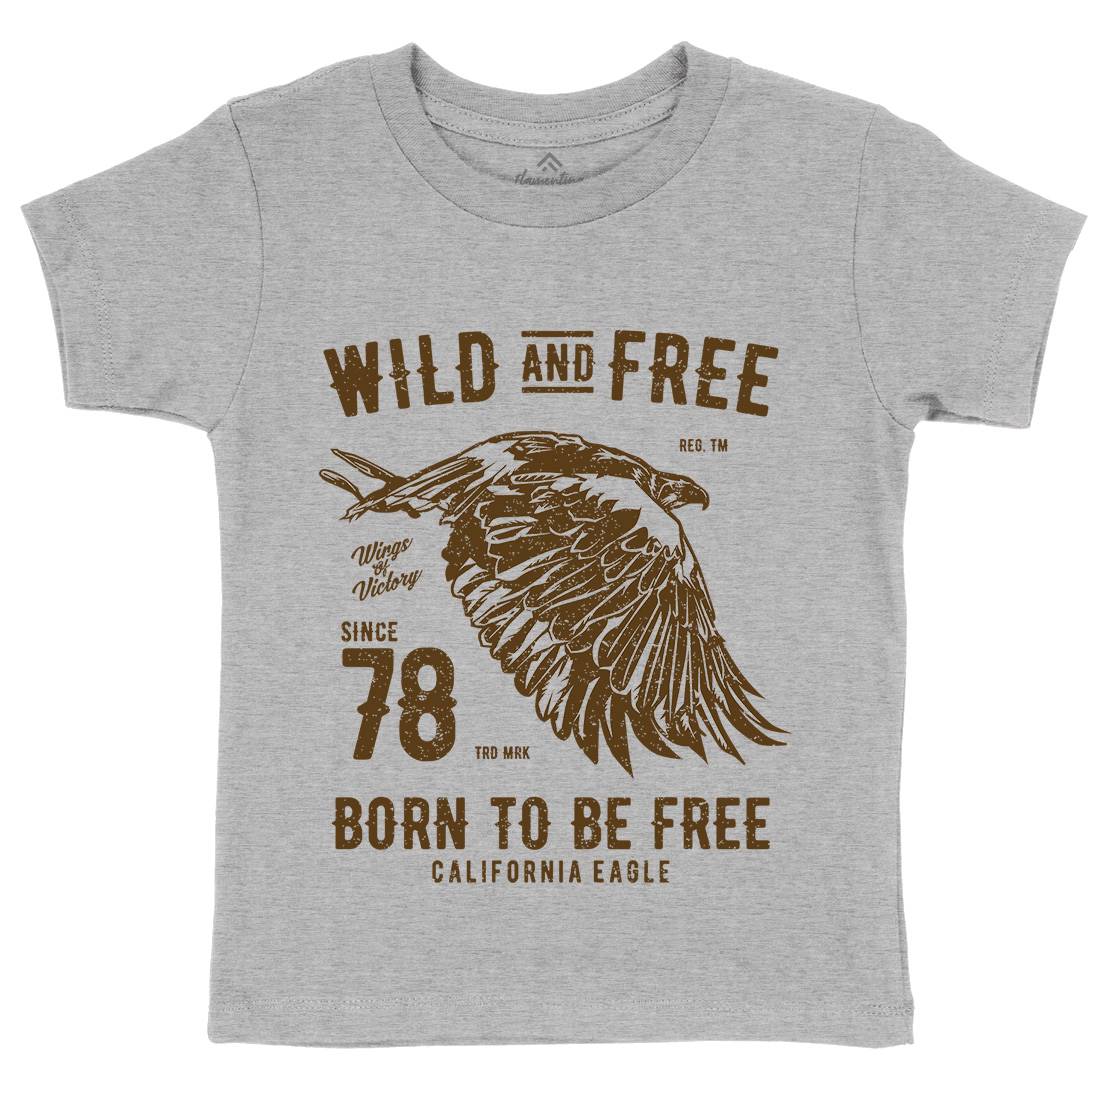 Wild And Free Kids Organic Crew Neck T-Shirt Army A792